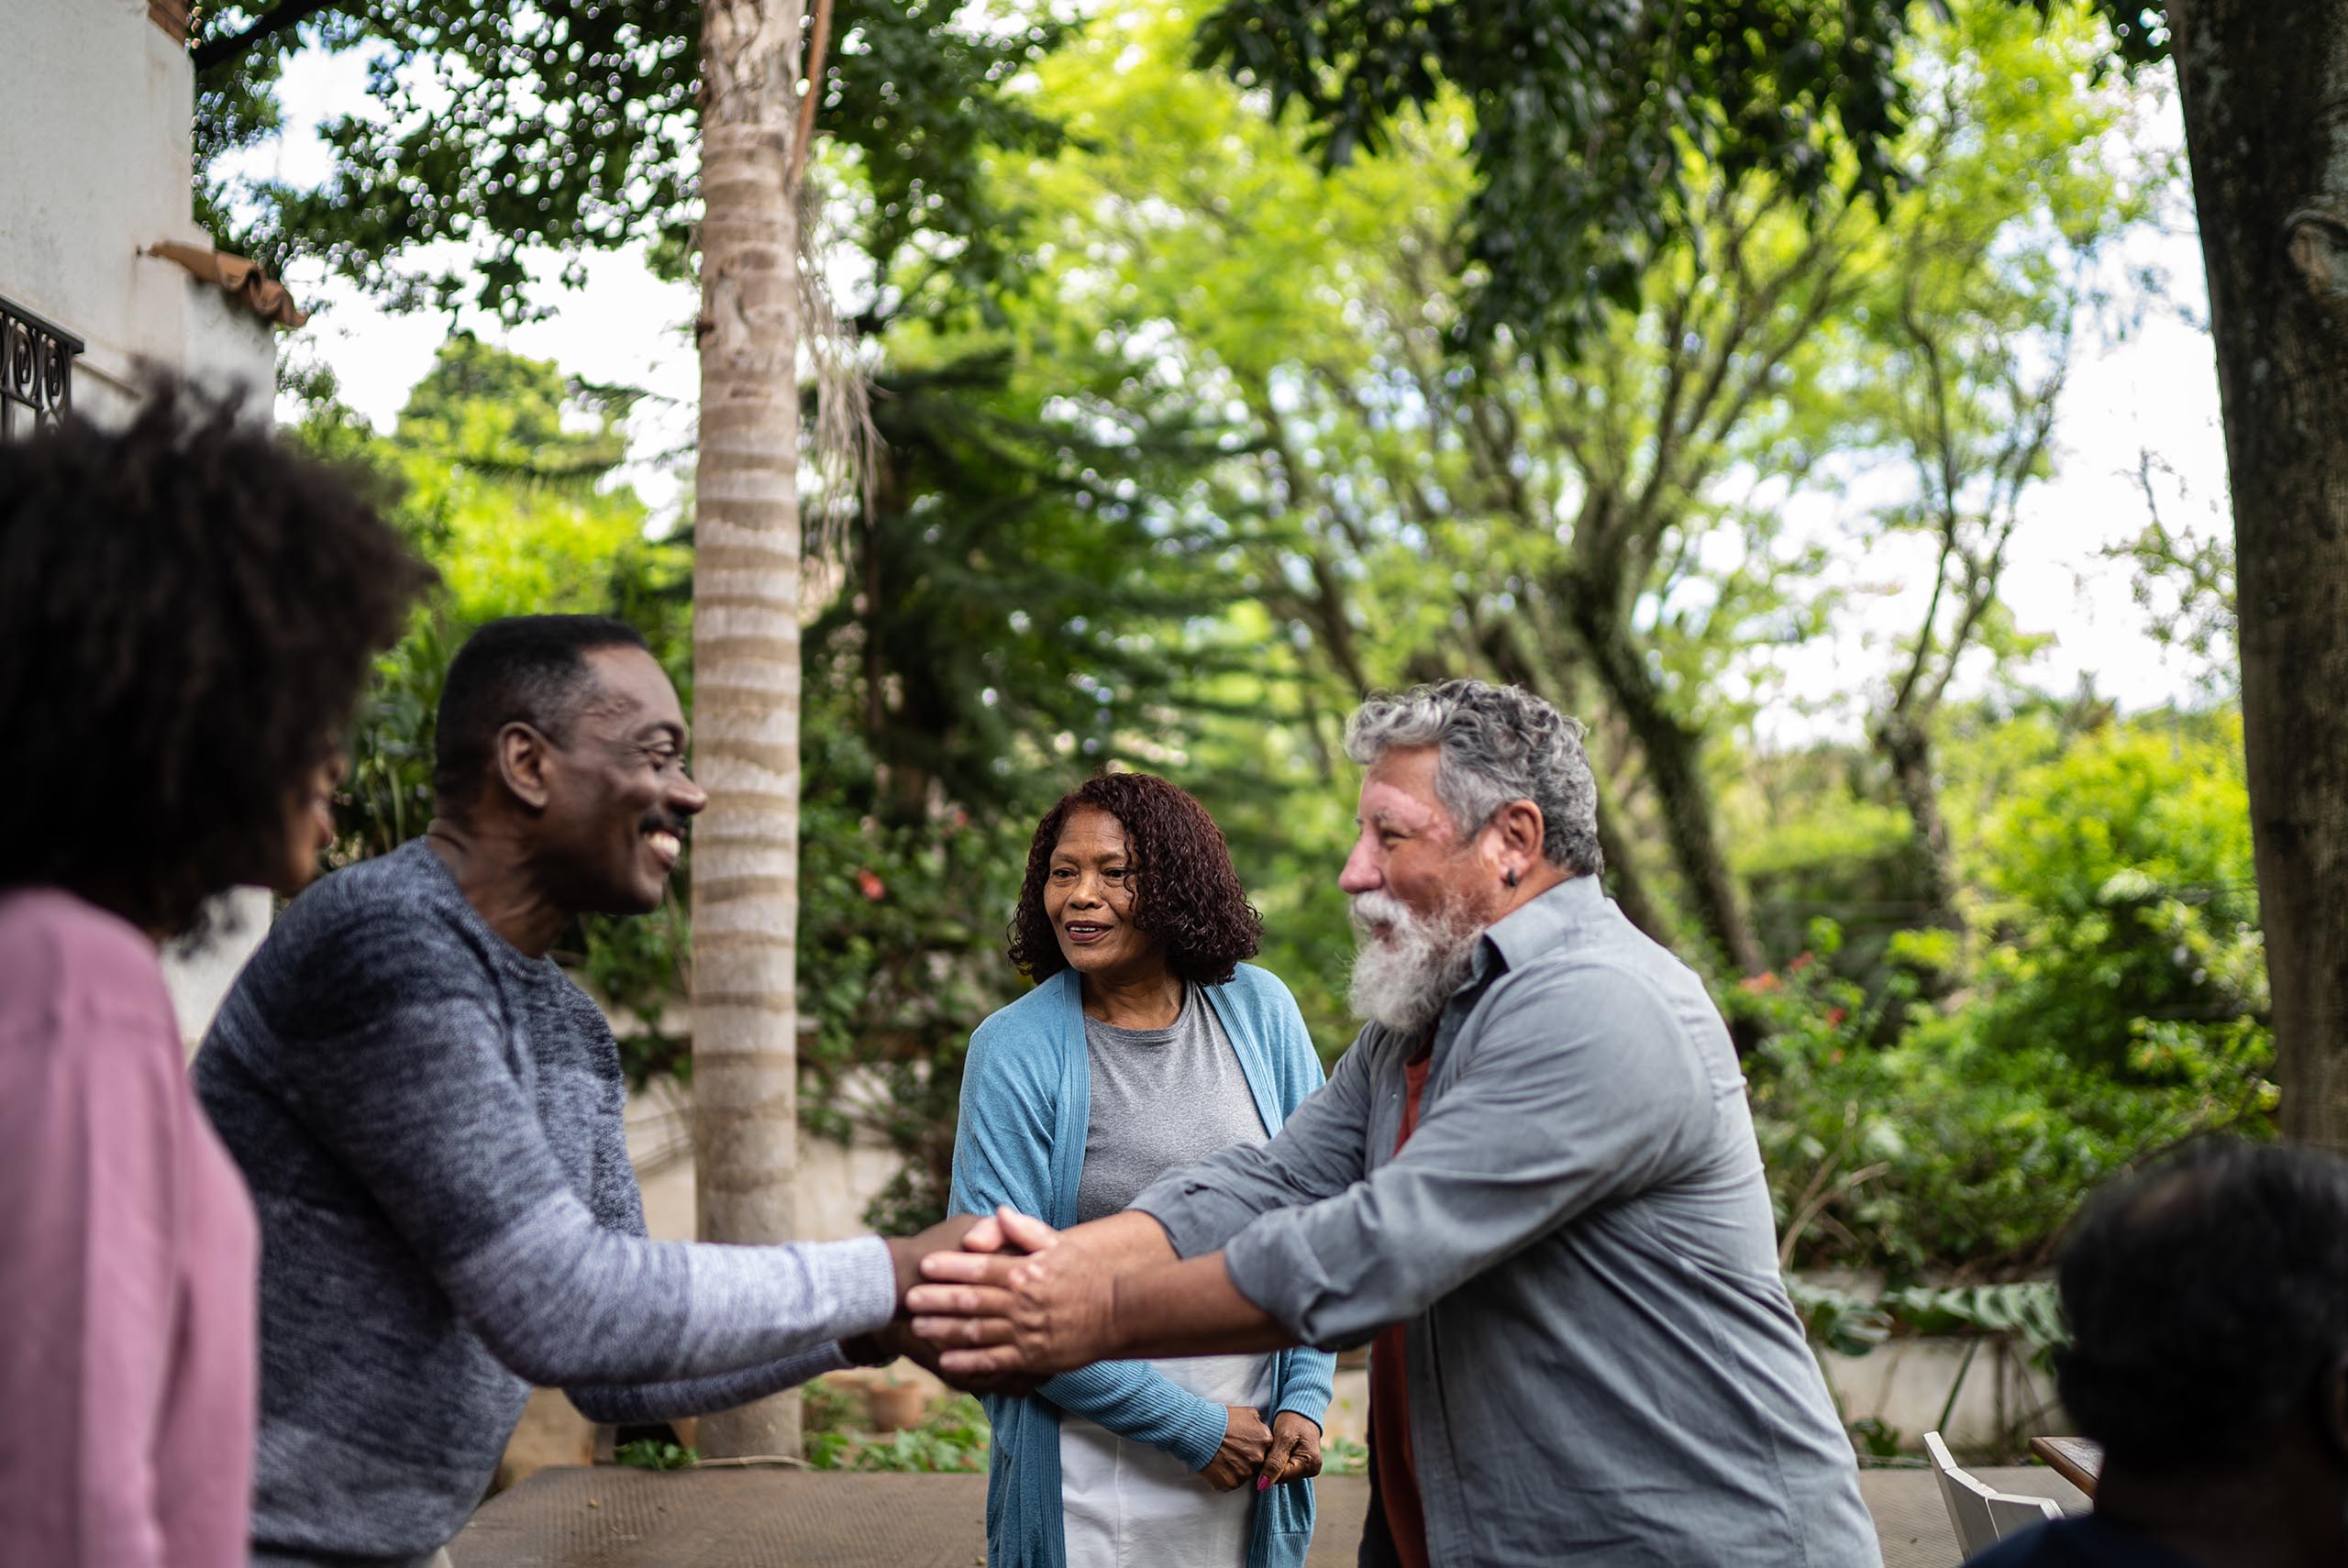 A middle aged African American man stands outside and shakes hands joyously with an older Caucasian man with vitiligo and a long white beard. A middle aged African American woman stands in the background smiling and wearing a blue cardigan.